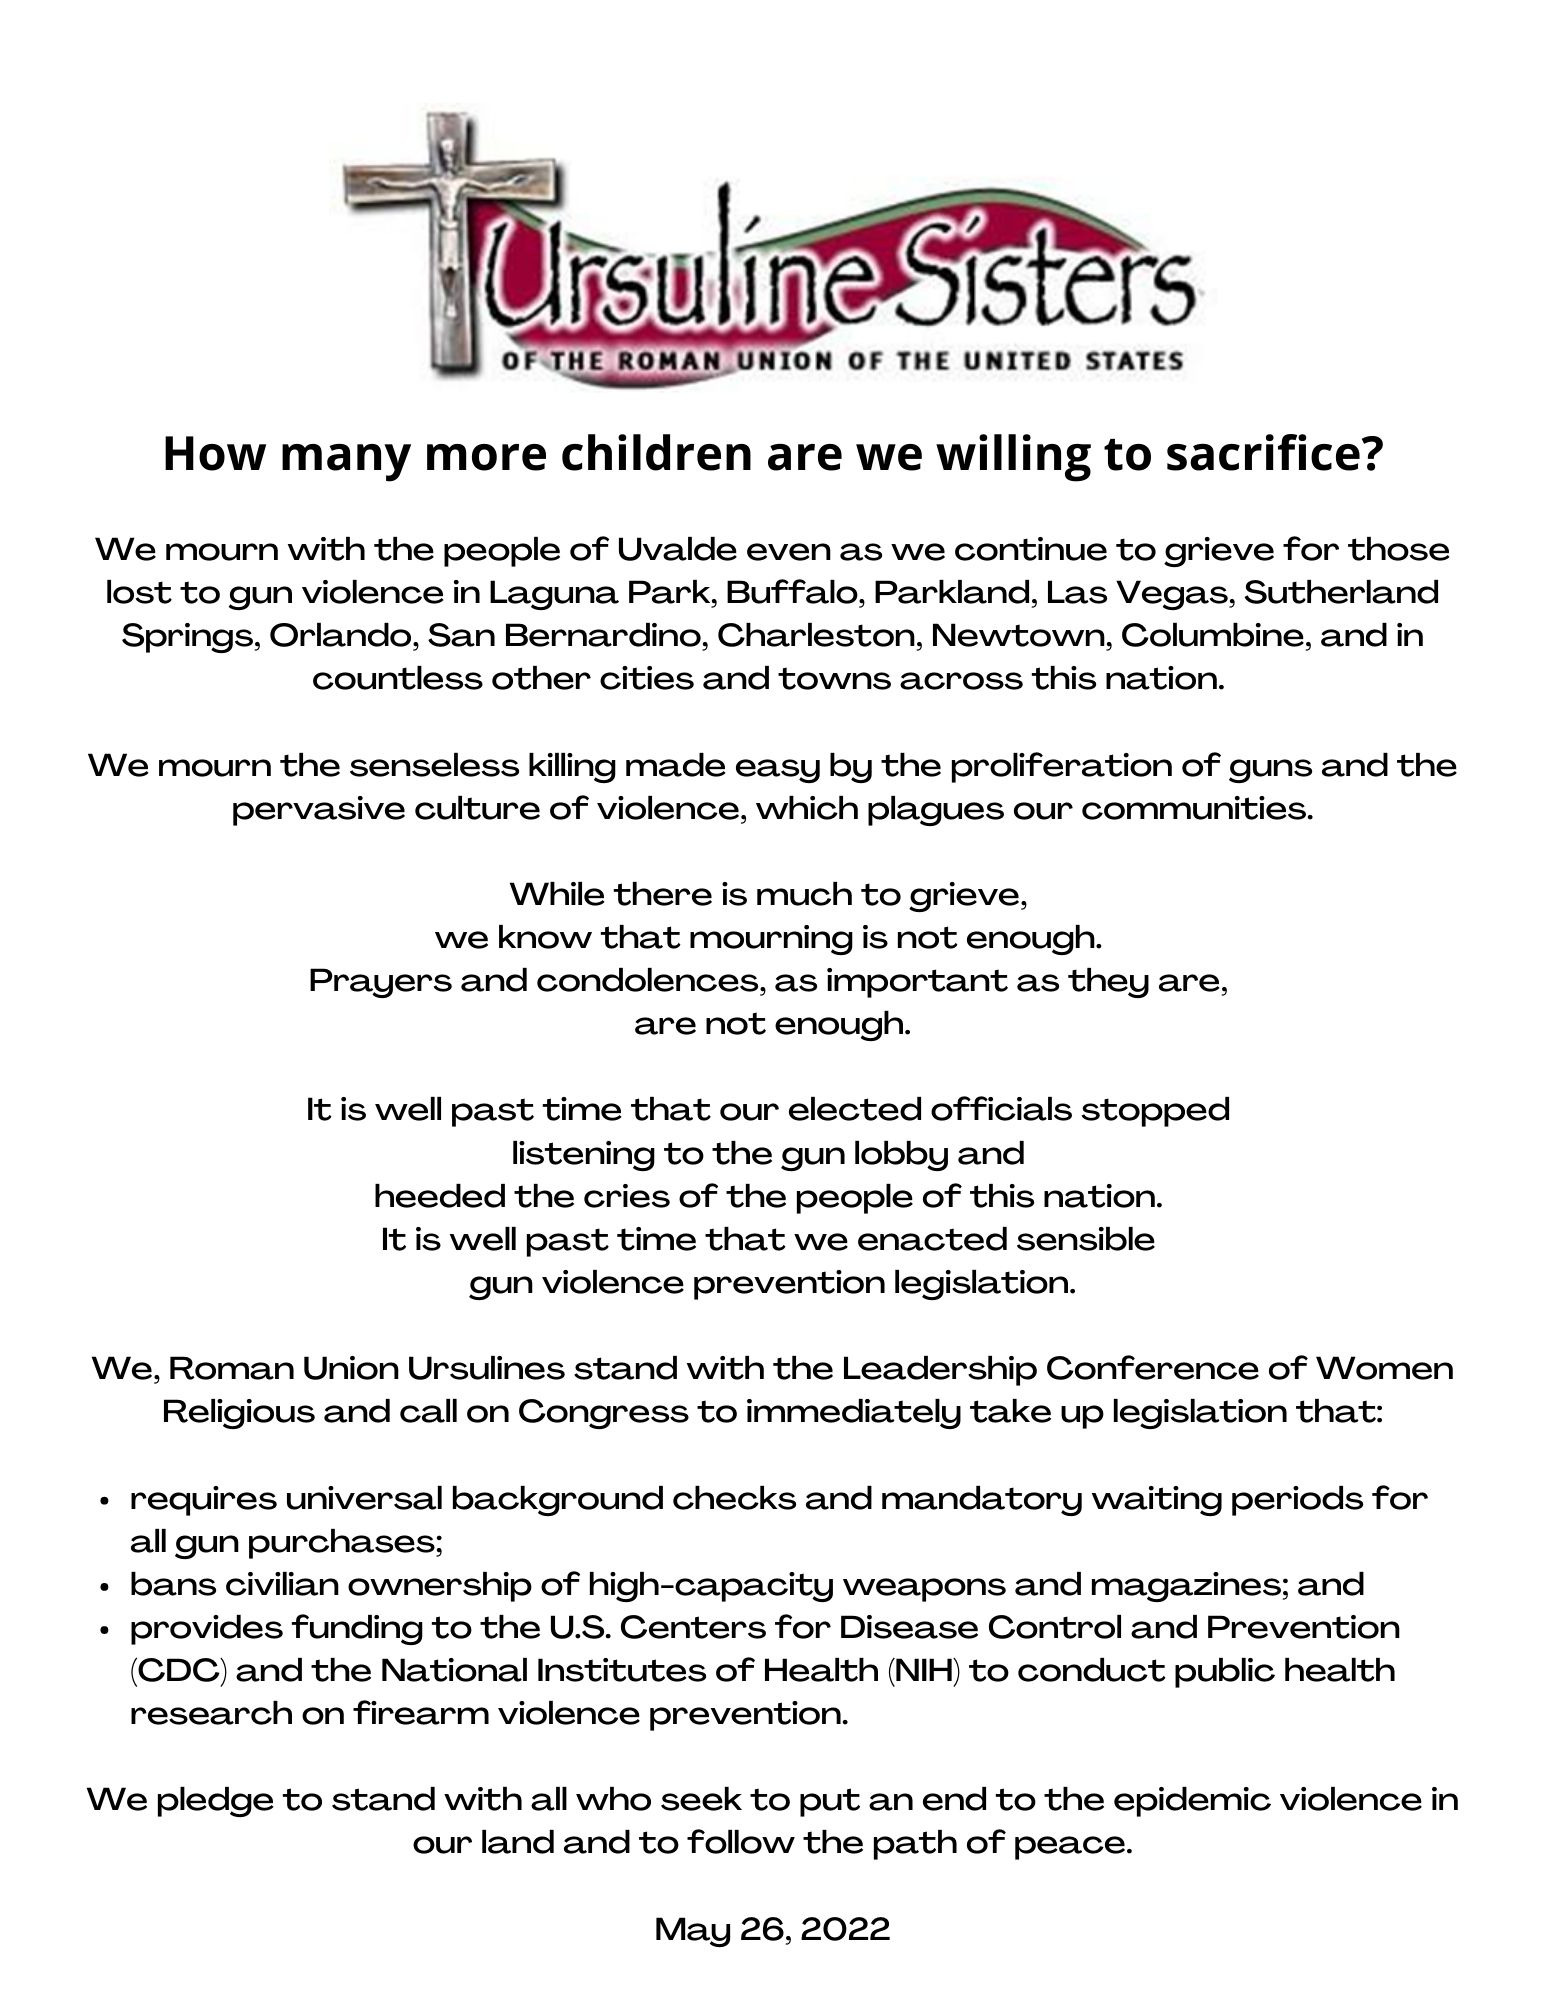 Donate to the Ursulines